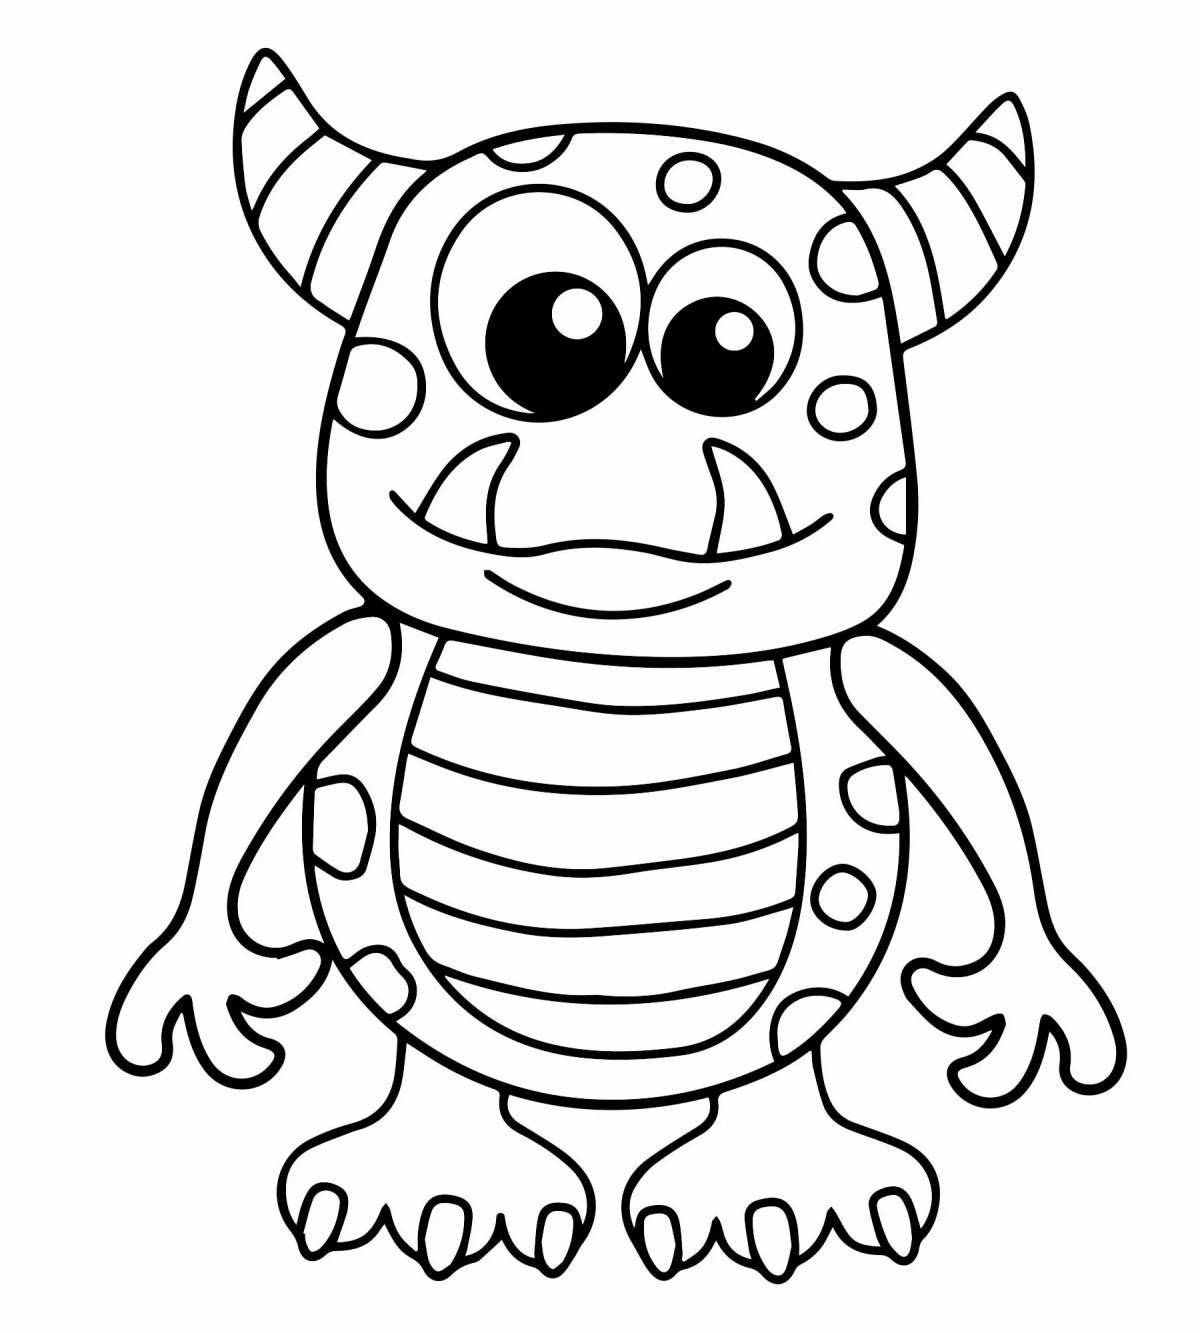 Creature coloring page